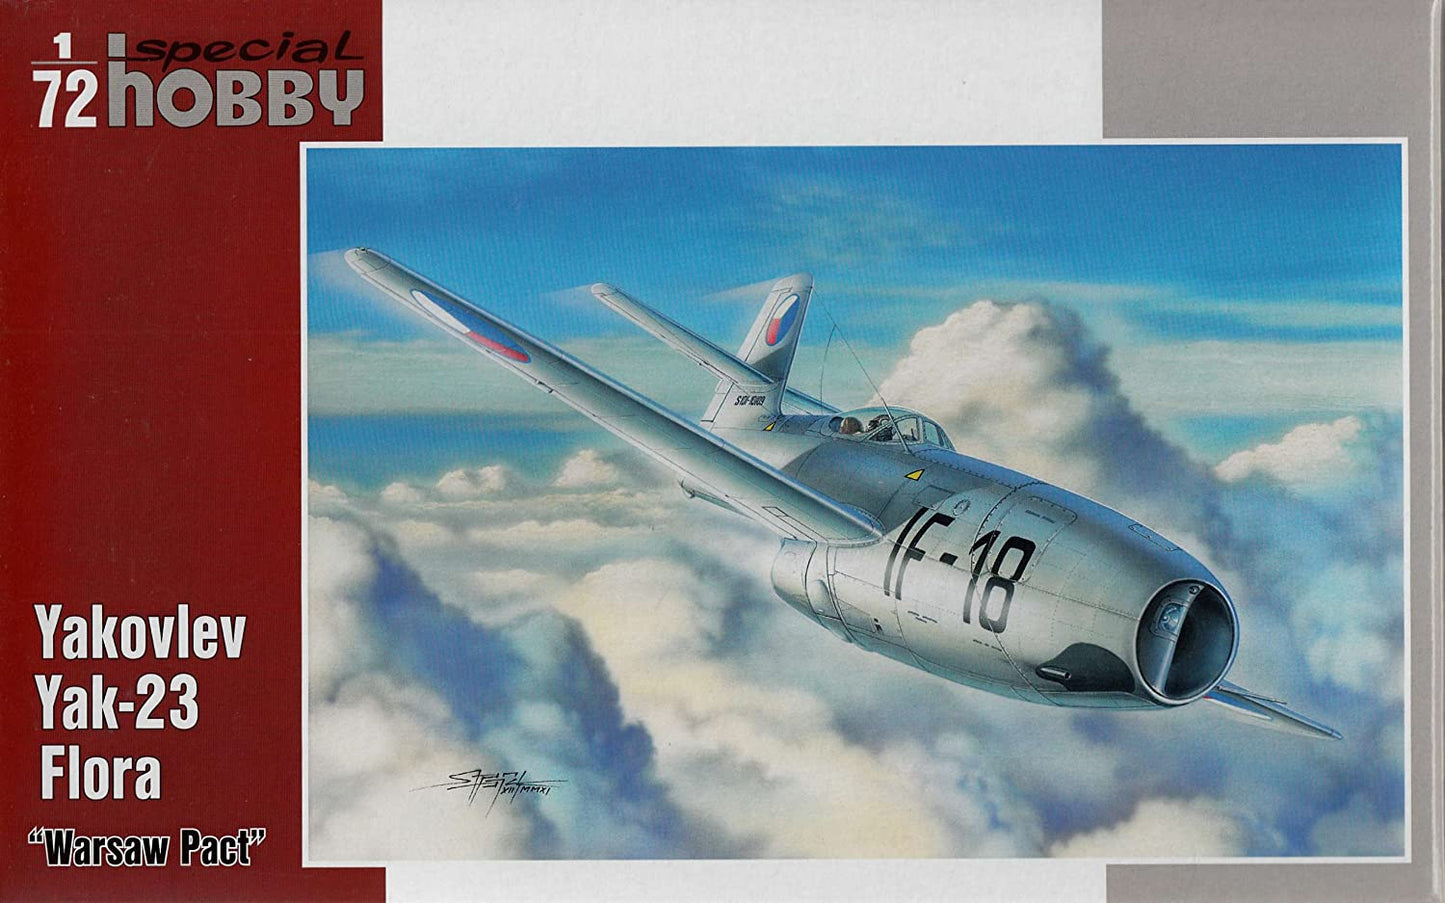 Yakolev Yak-23 Flora "Warsaw Pact" - SPECIAL HOBBY 1/72